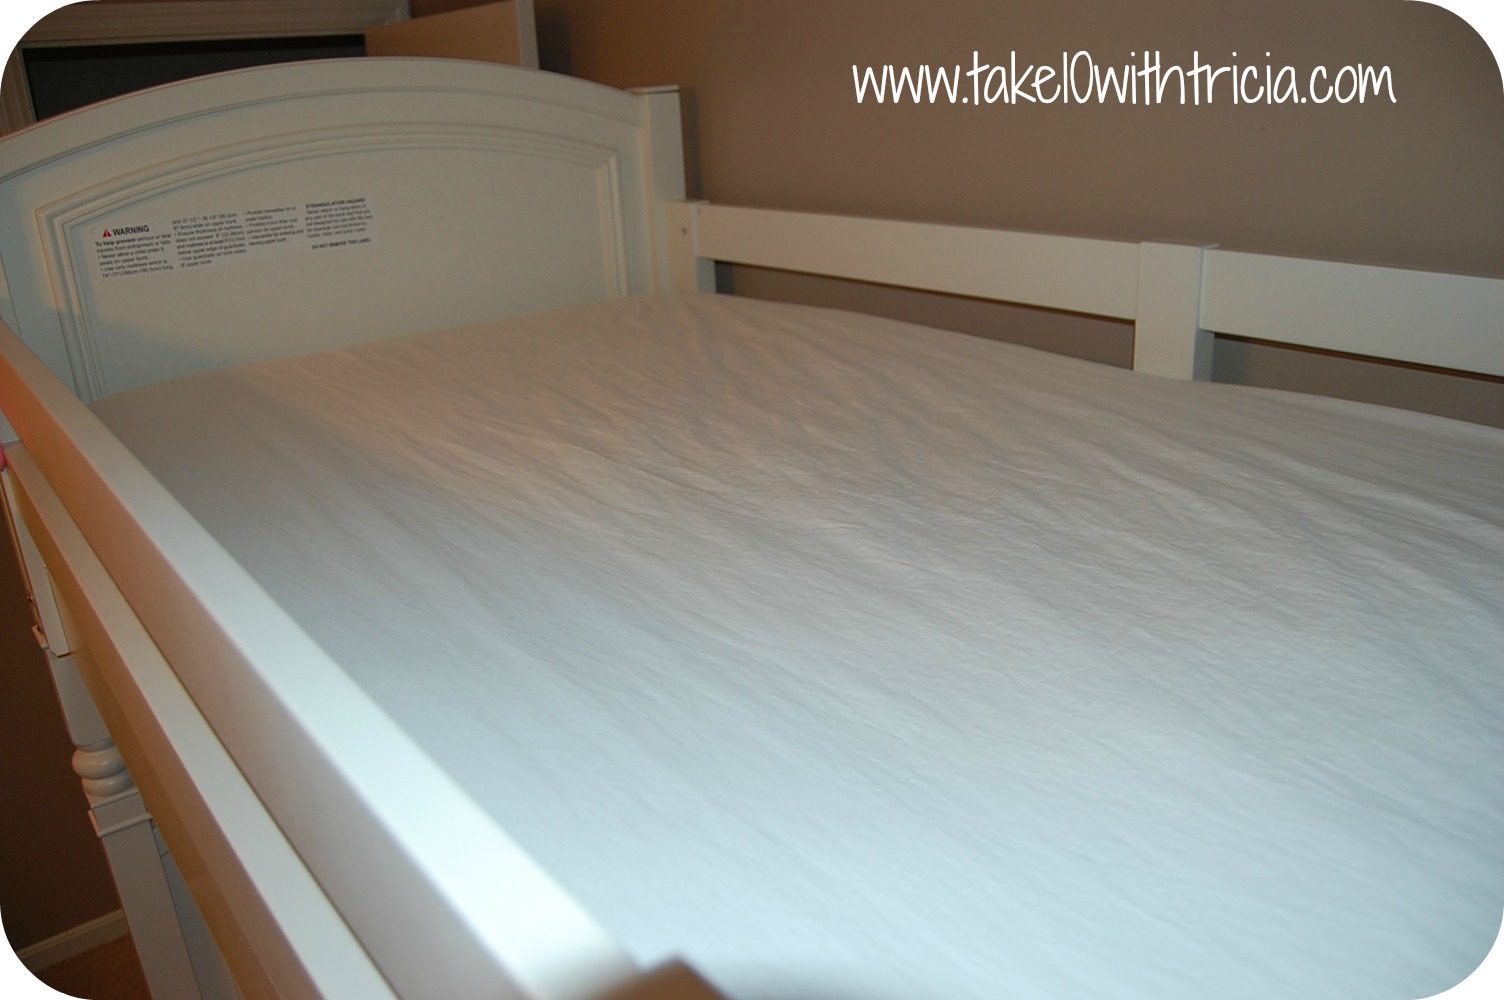 The Secret To Bunk Bed Sheets Take 10, How To Change Top Bunk Bed Sheets